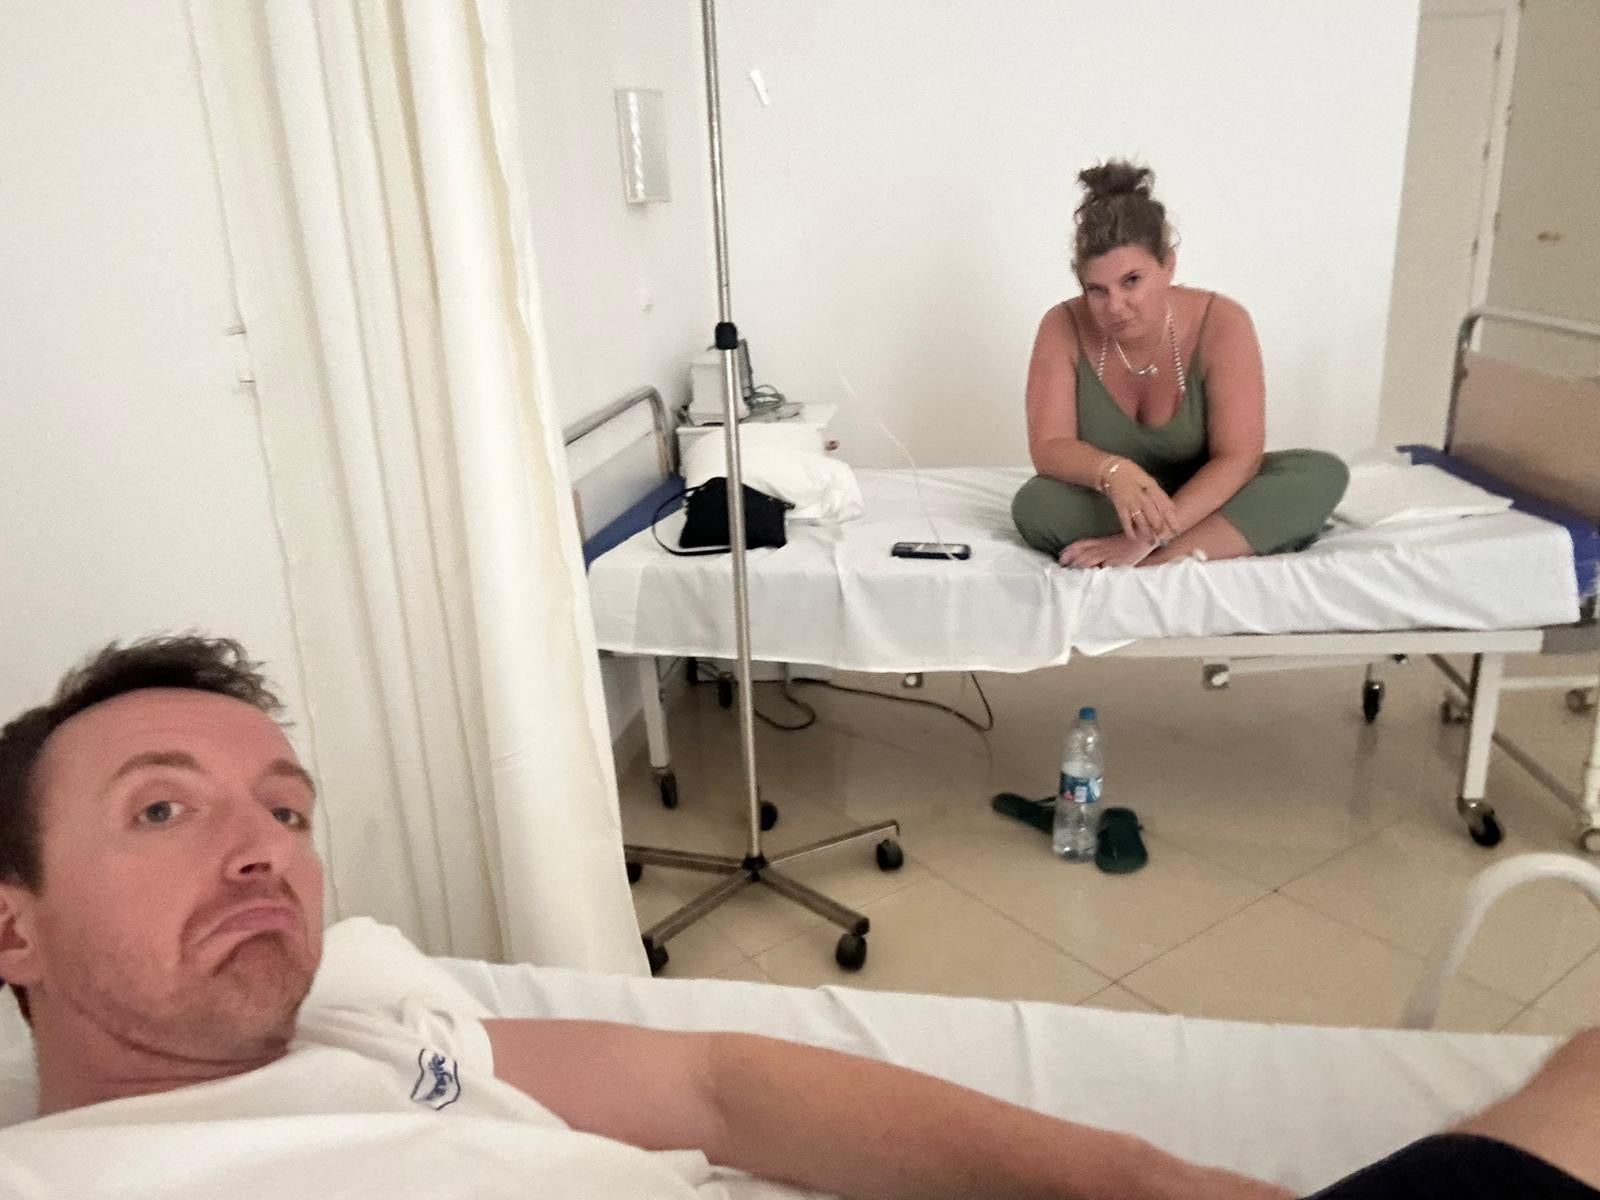 Lorraine Wilson and Mark Bonner in the hospital after experiencing gastric illness whilst staying at the Riu Palace Santa Maria hotel in Cape Verde